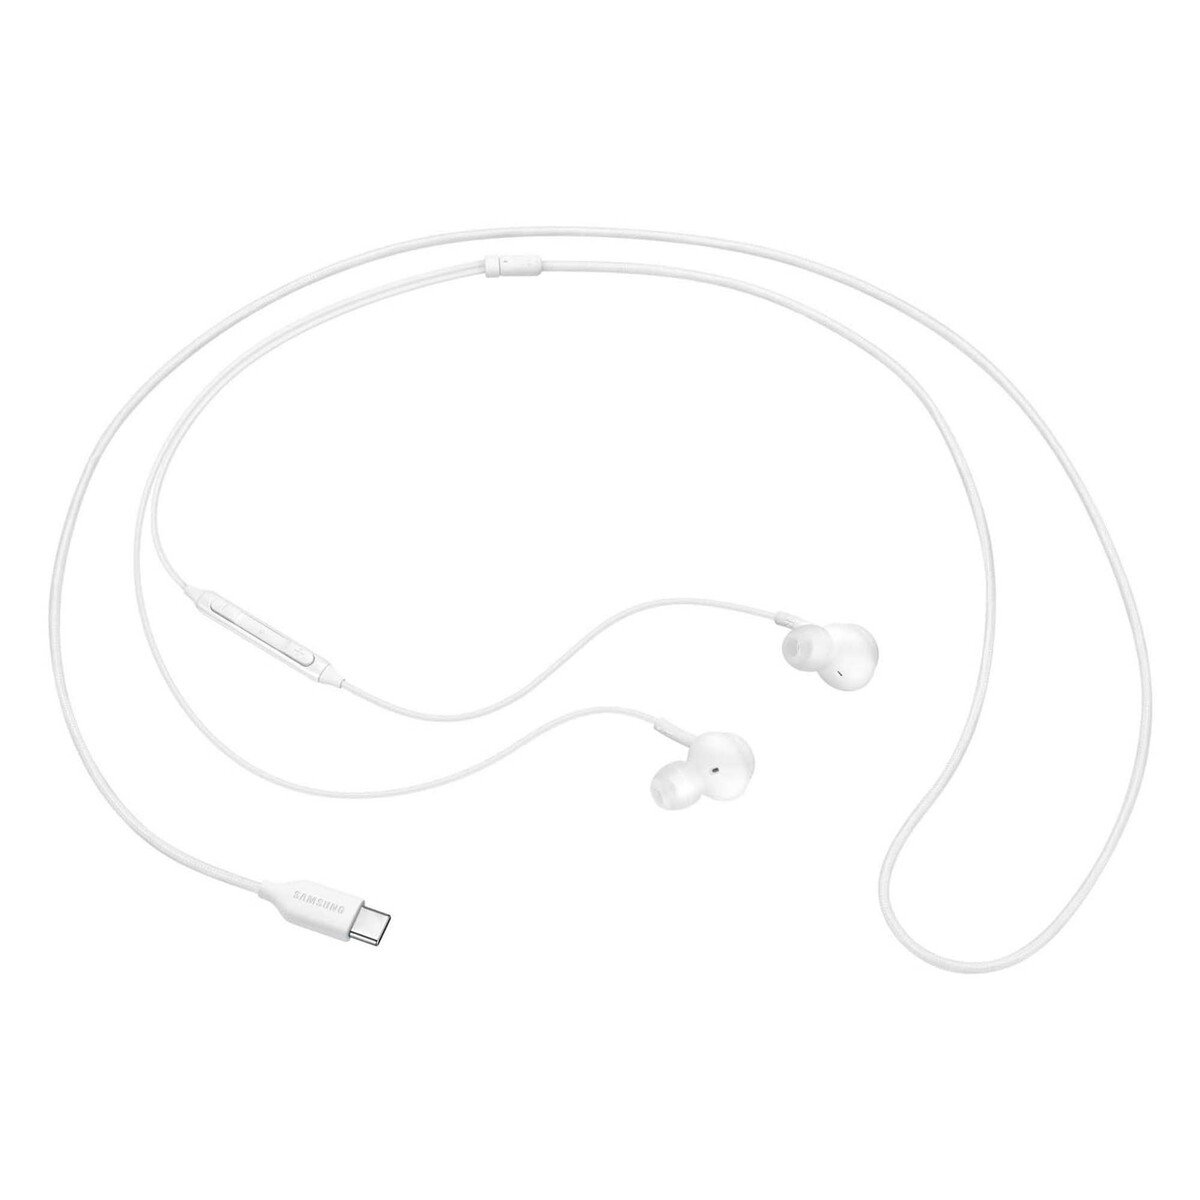 Samsung Stereo In-Ear Best Type-C Online Lulu Hands Earphones Price at Kuwait Mobile EO-IC100 (White) Free | 